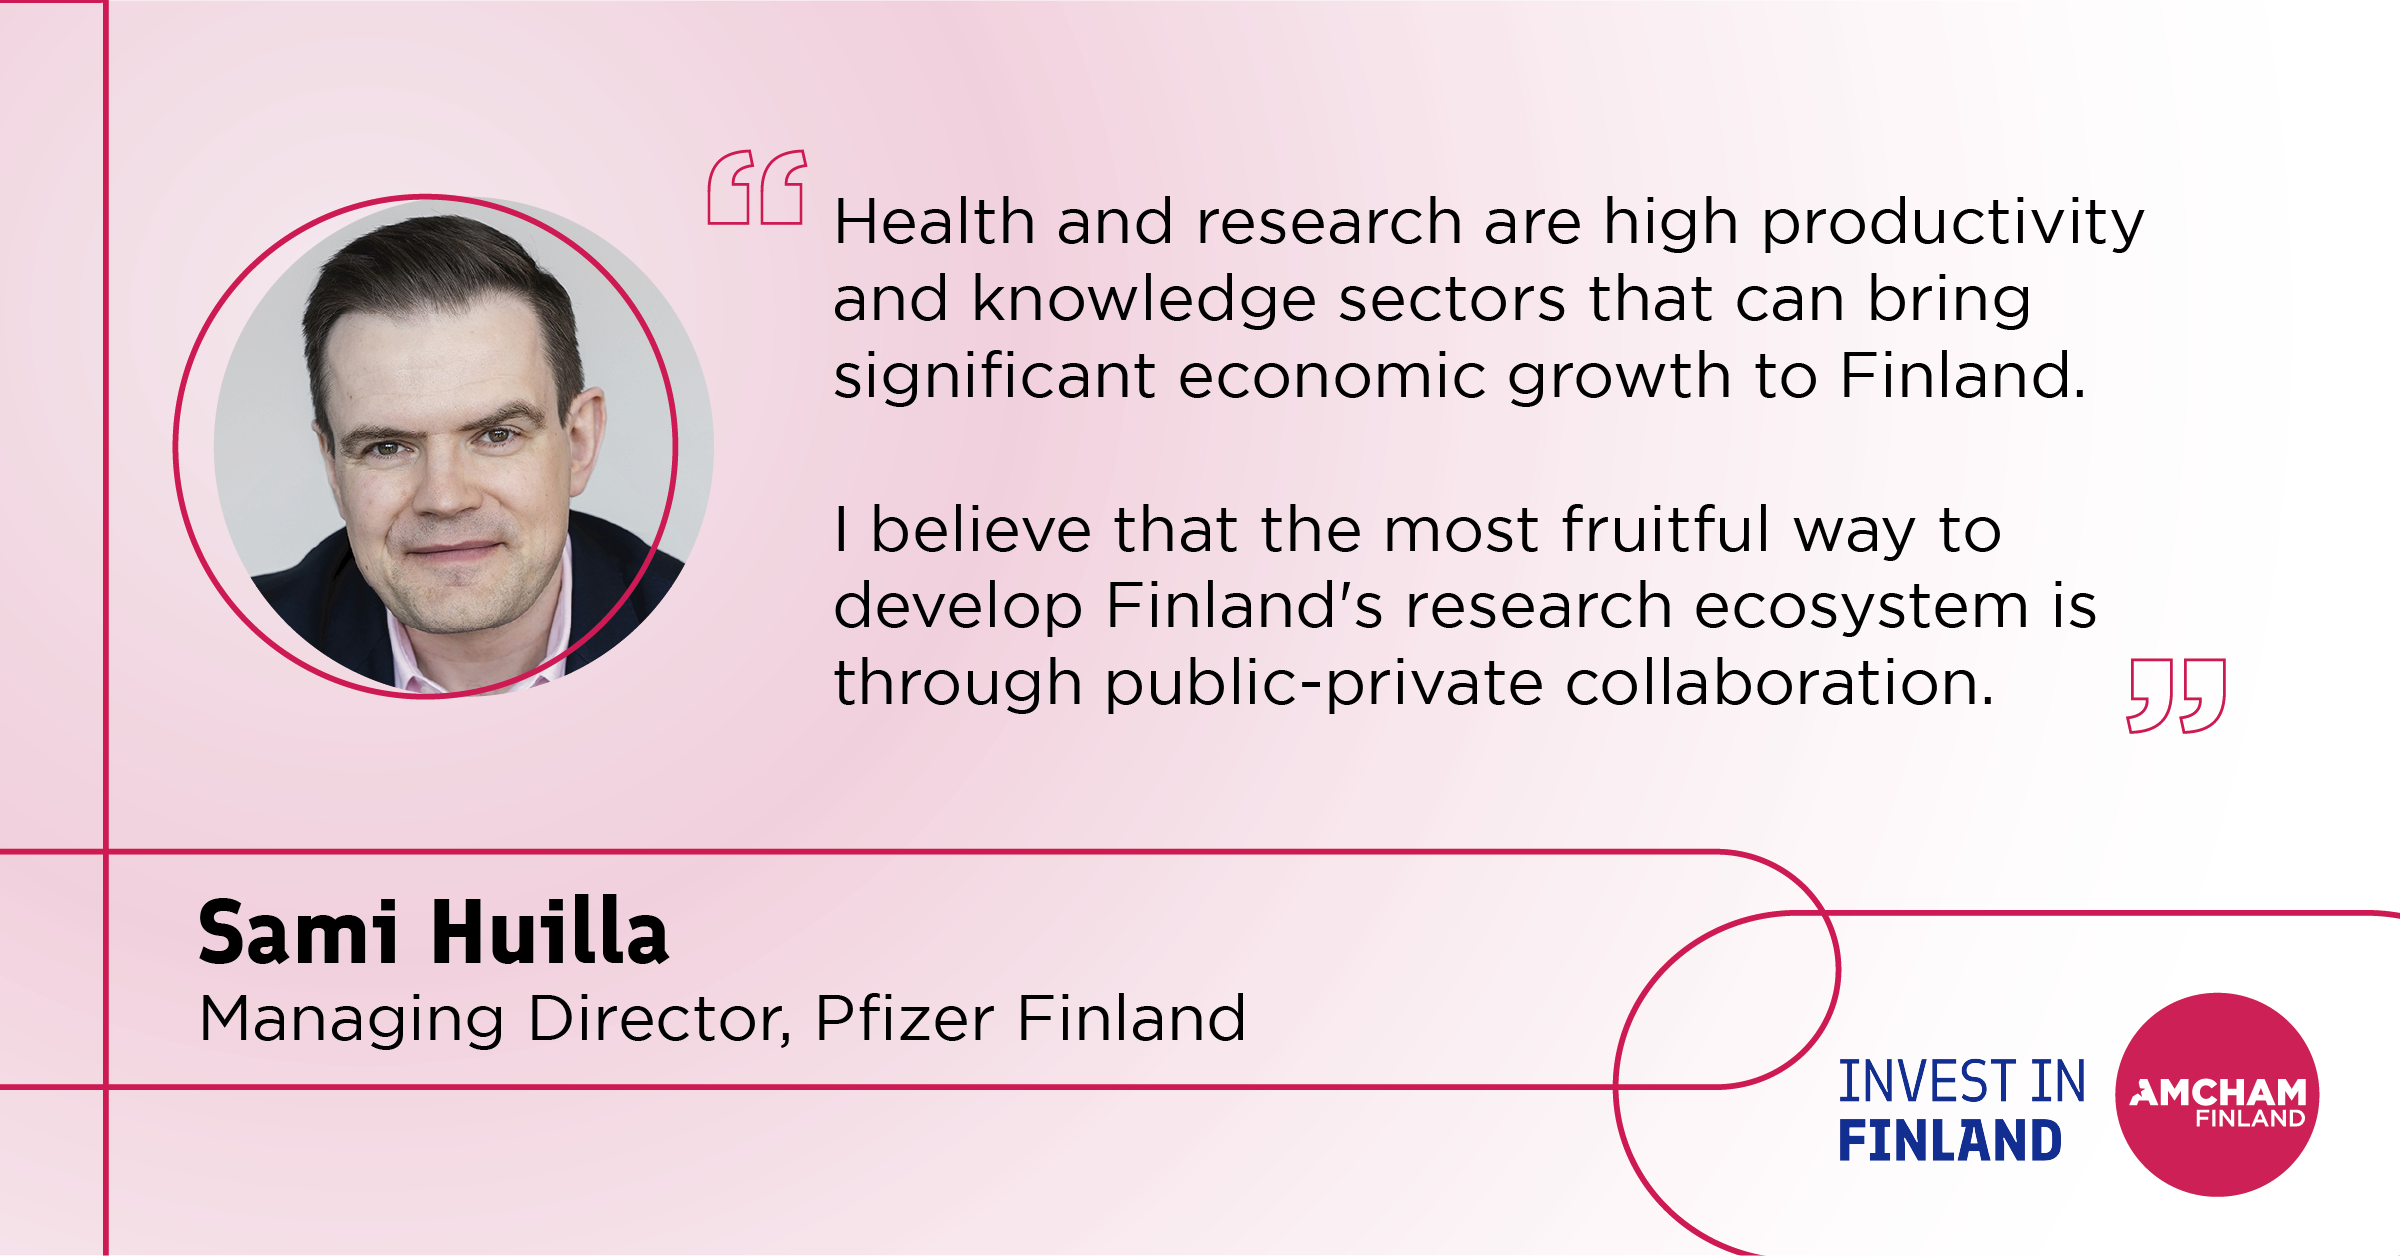 Quote by Sami Huilla, Managing Director of Pfizer Finland